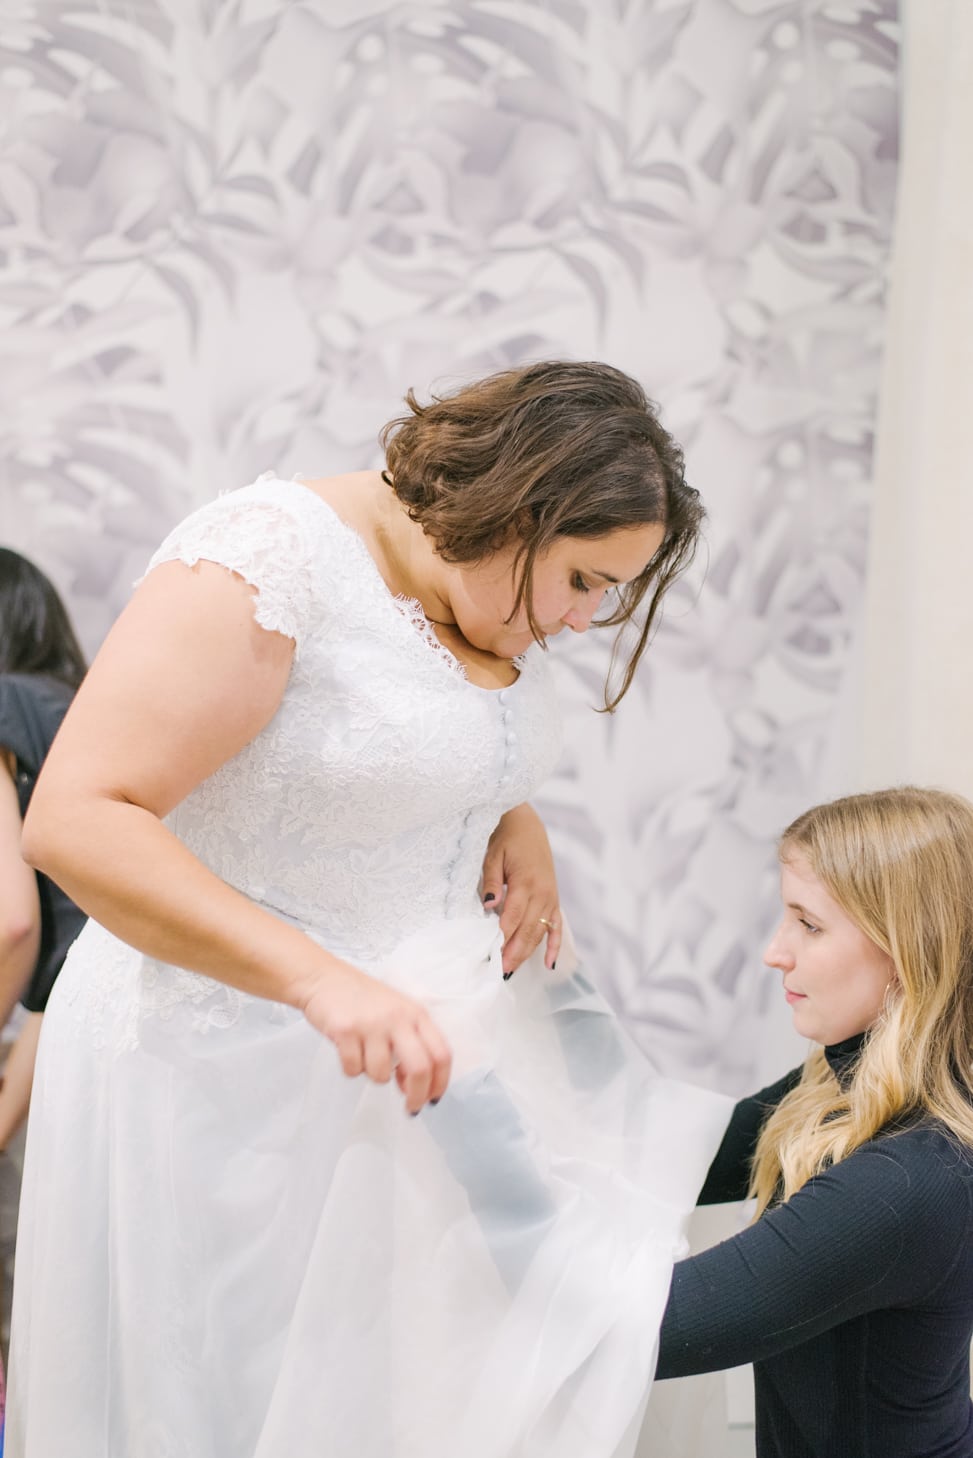 Plus size woman with short brunette hair getting her wedding dressed measure by a woman with long blonde hair in a black long sleeve shirt